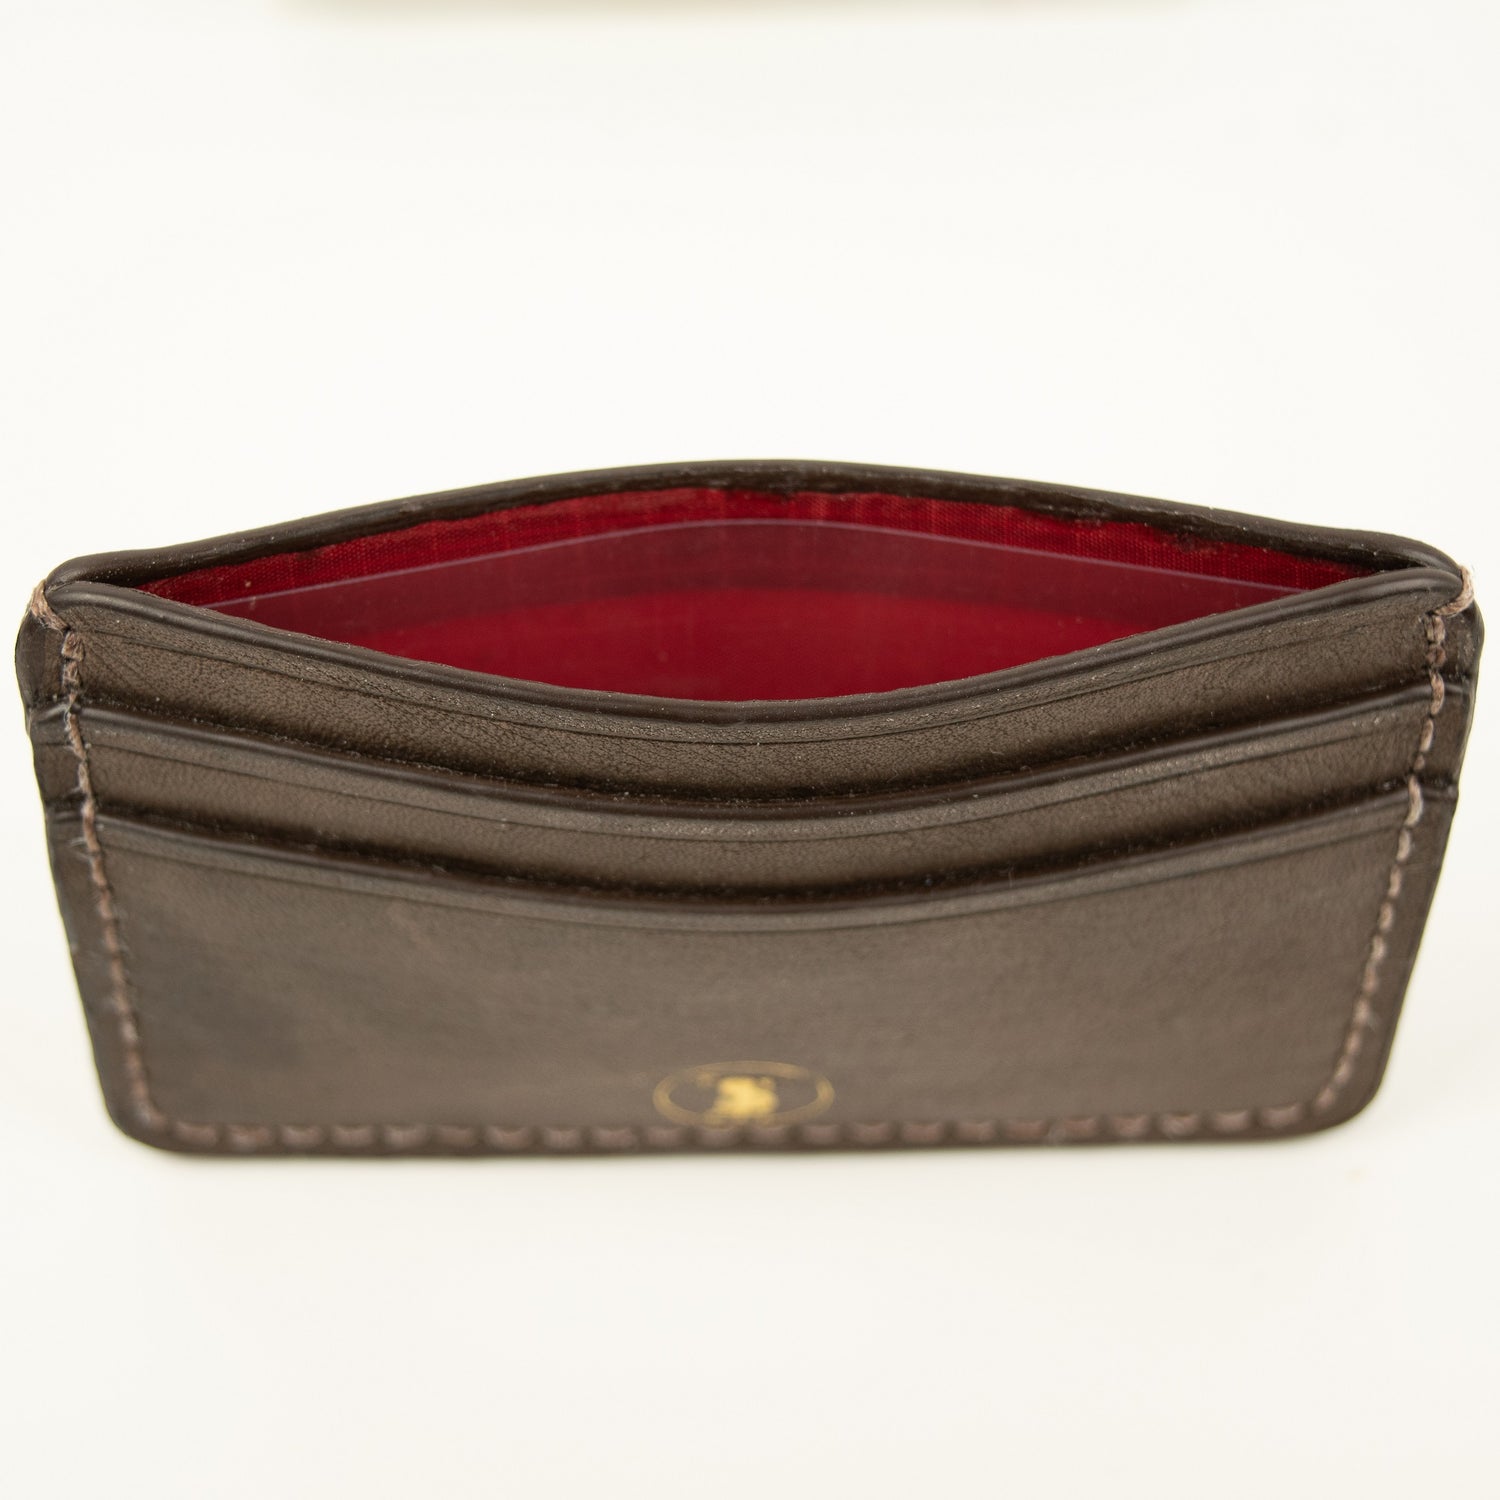 Front view of Distressed finish Chocolate brown leather slim card case with two front pockets. Center pocket is open showing a red lining and gold brand logo on front  